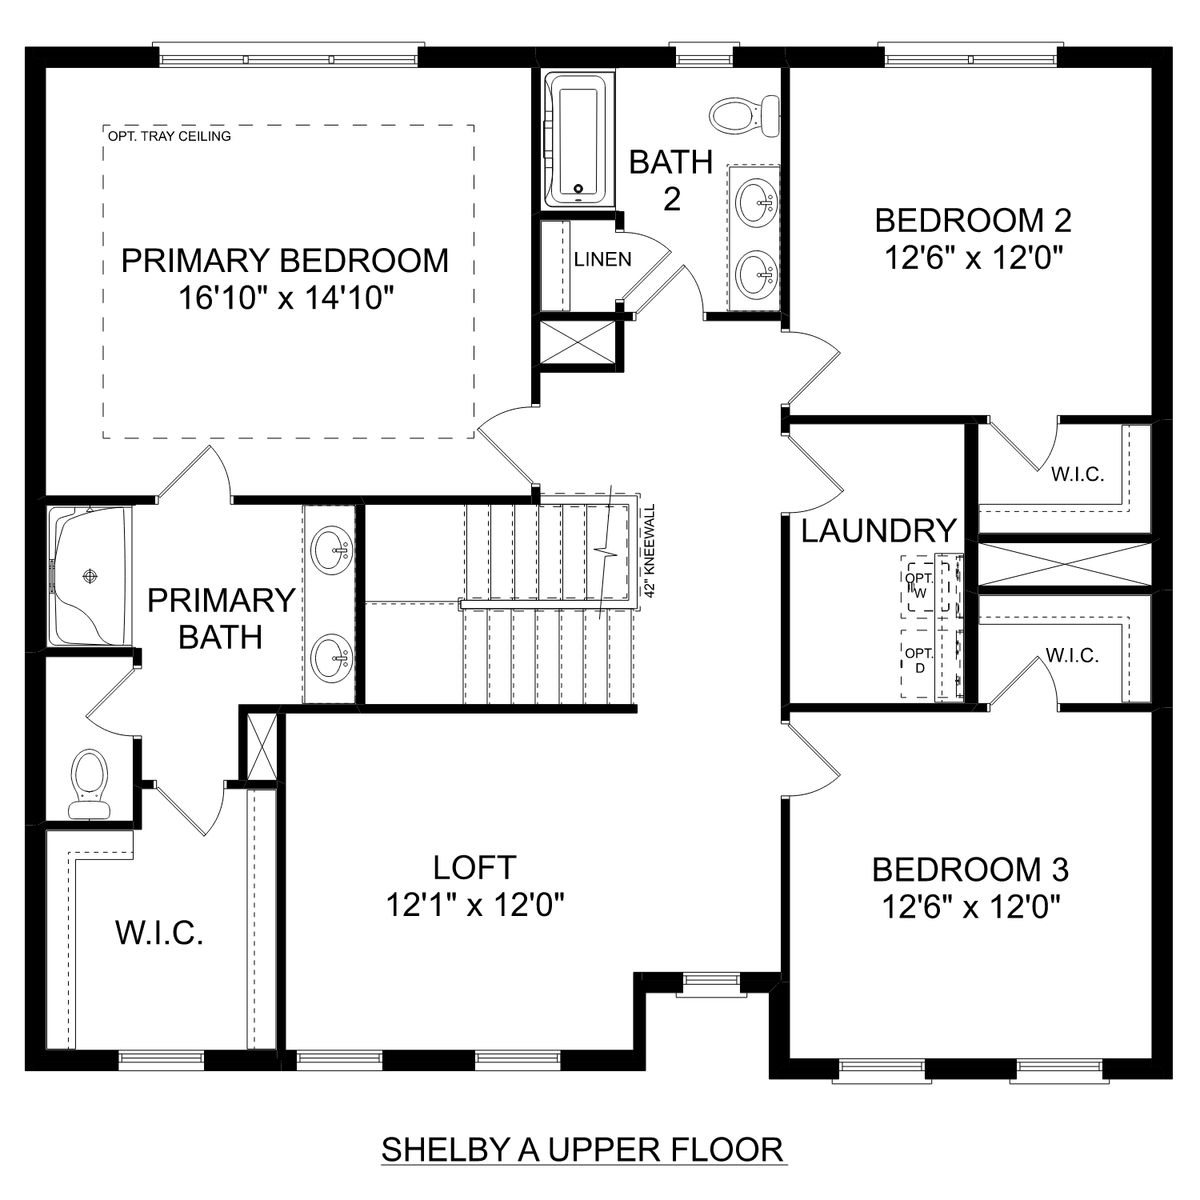 2 - The Shelby A floor plan layout for 29446 Canoe Circle in Davidson Homes' Creekside community.